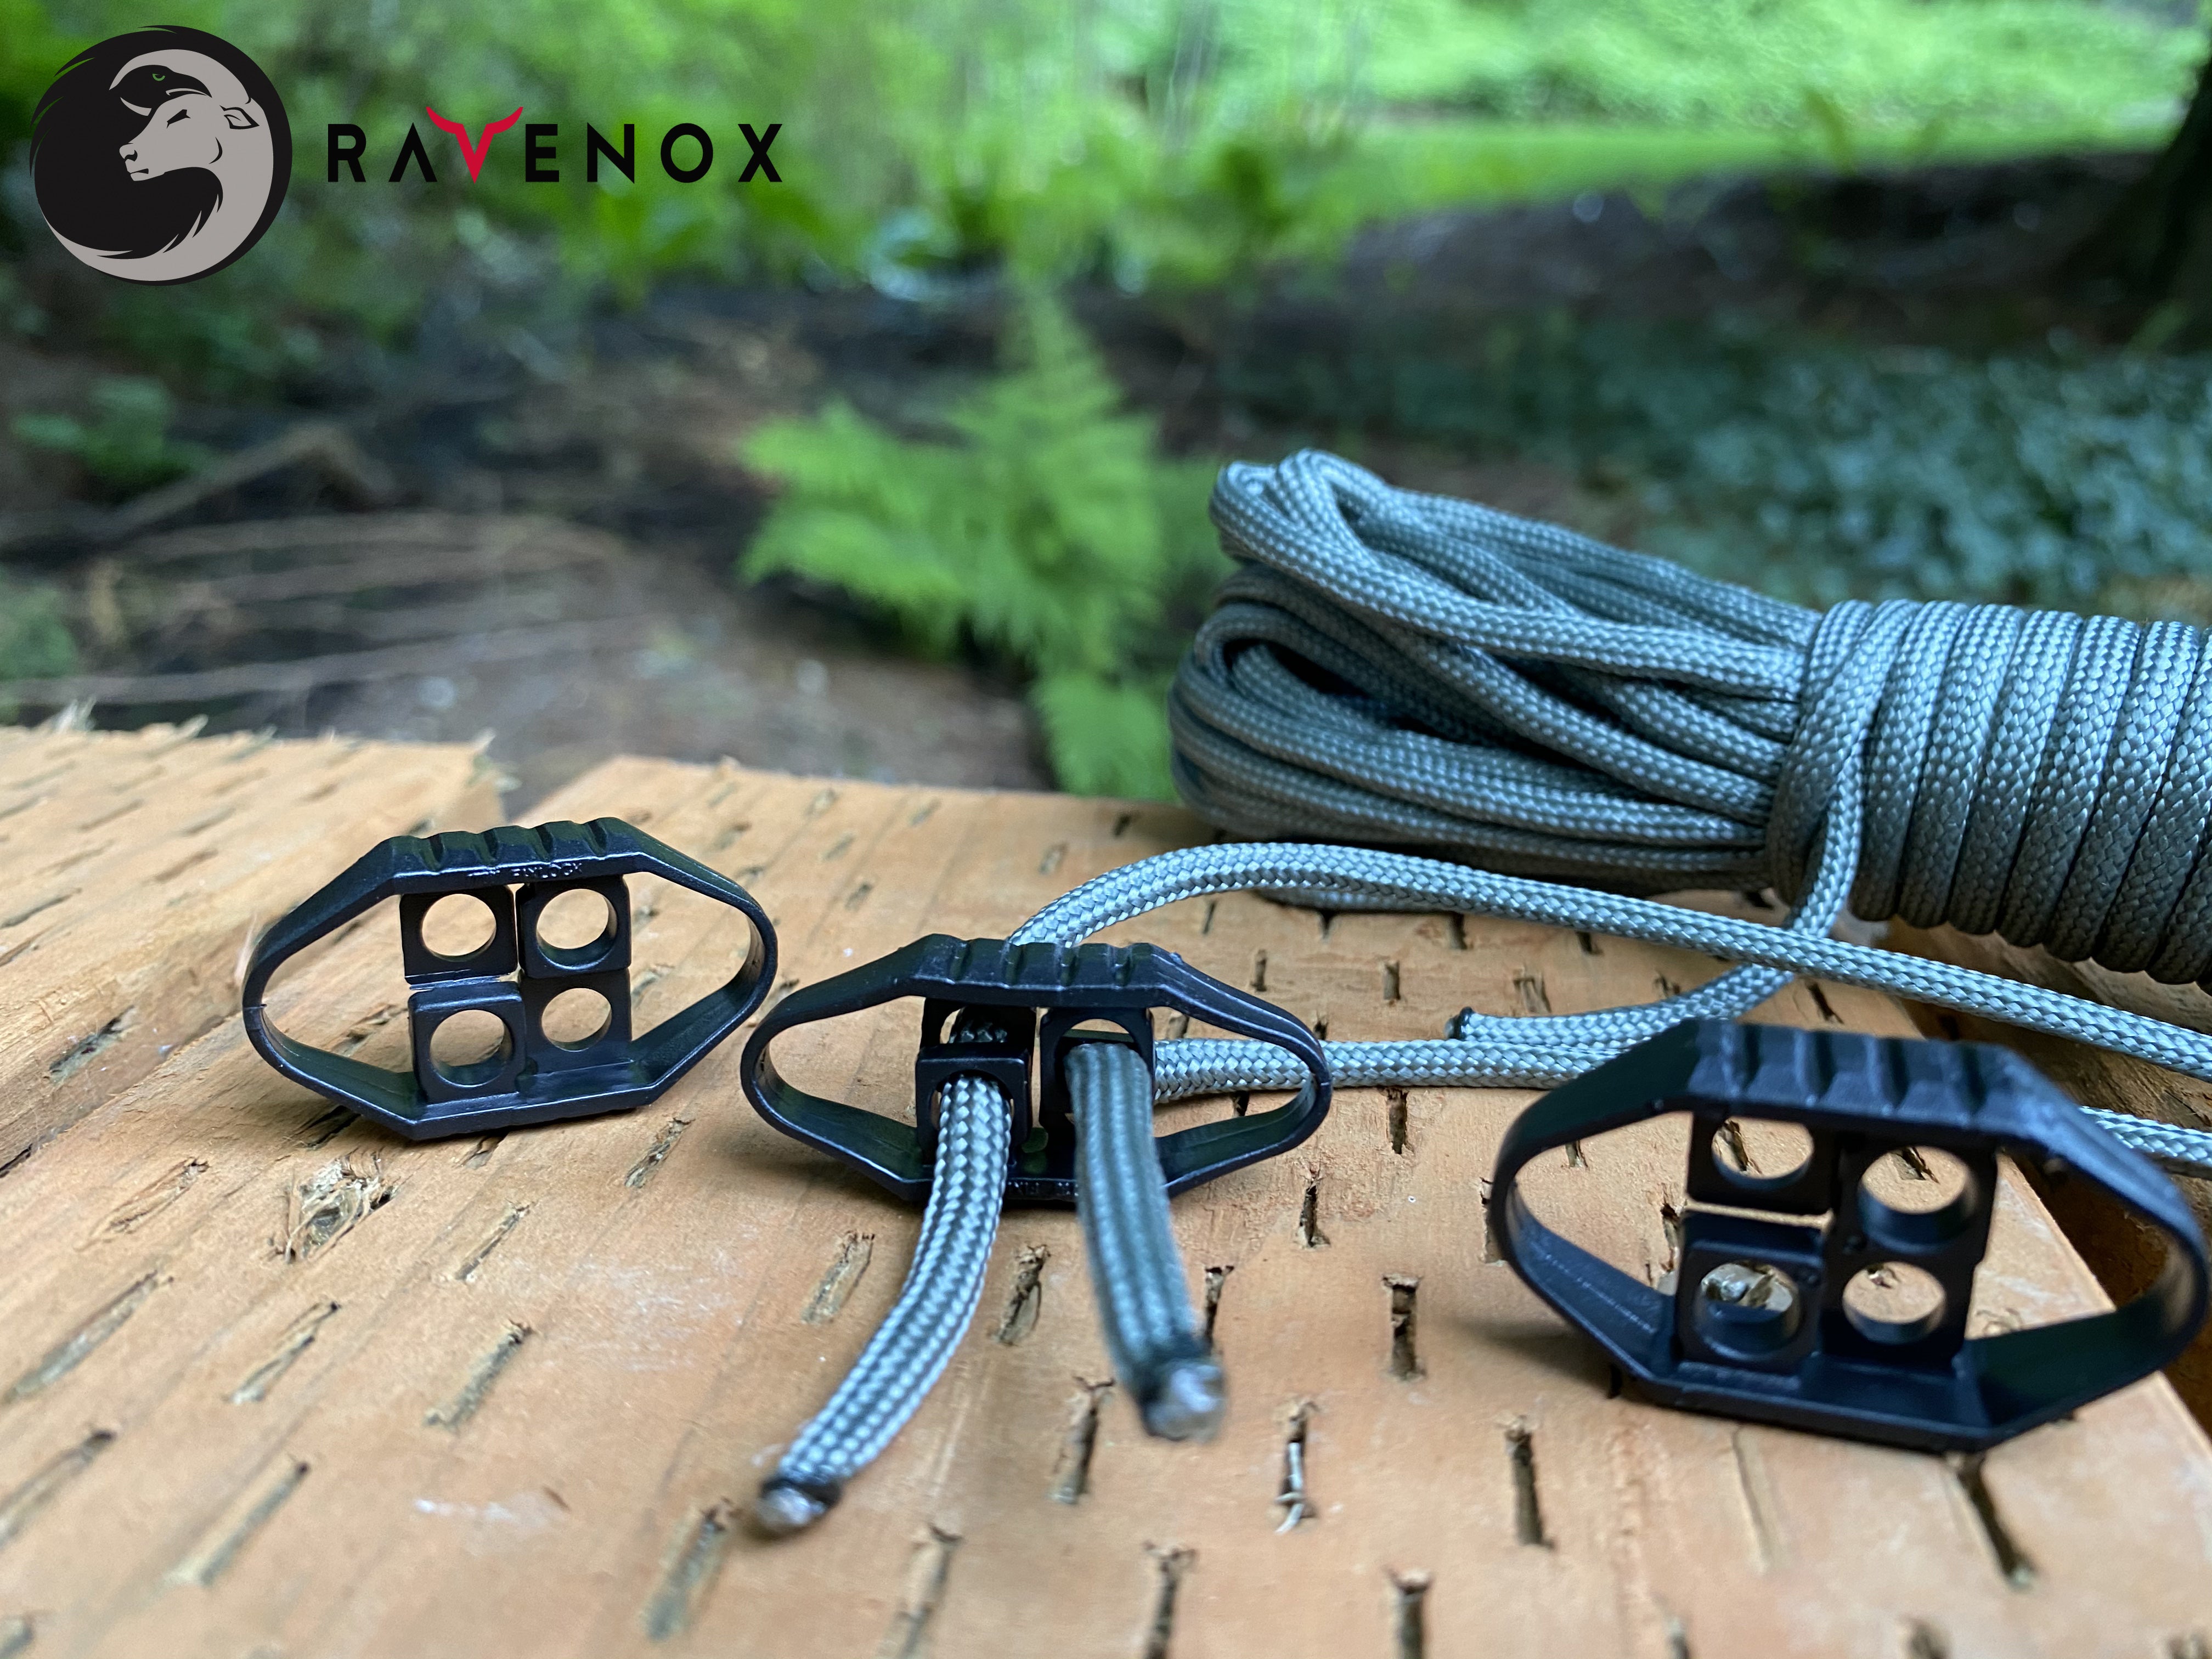 Ravenox Heavy Duty Barreloc Cord Lock | Cord Locks for Drawstrings, Rope | Clamp Toggle Stop Slider for Paracord, Bungee Cord, Accessory Cordage